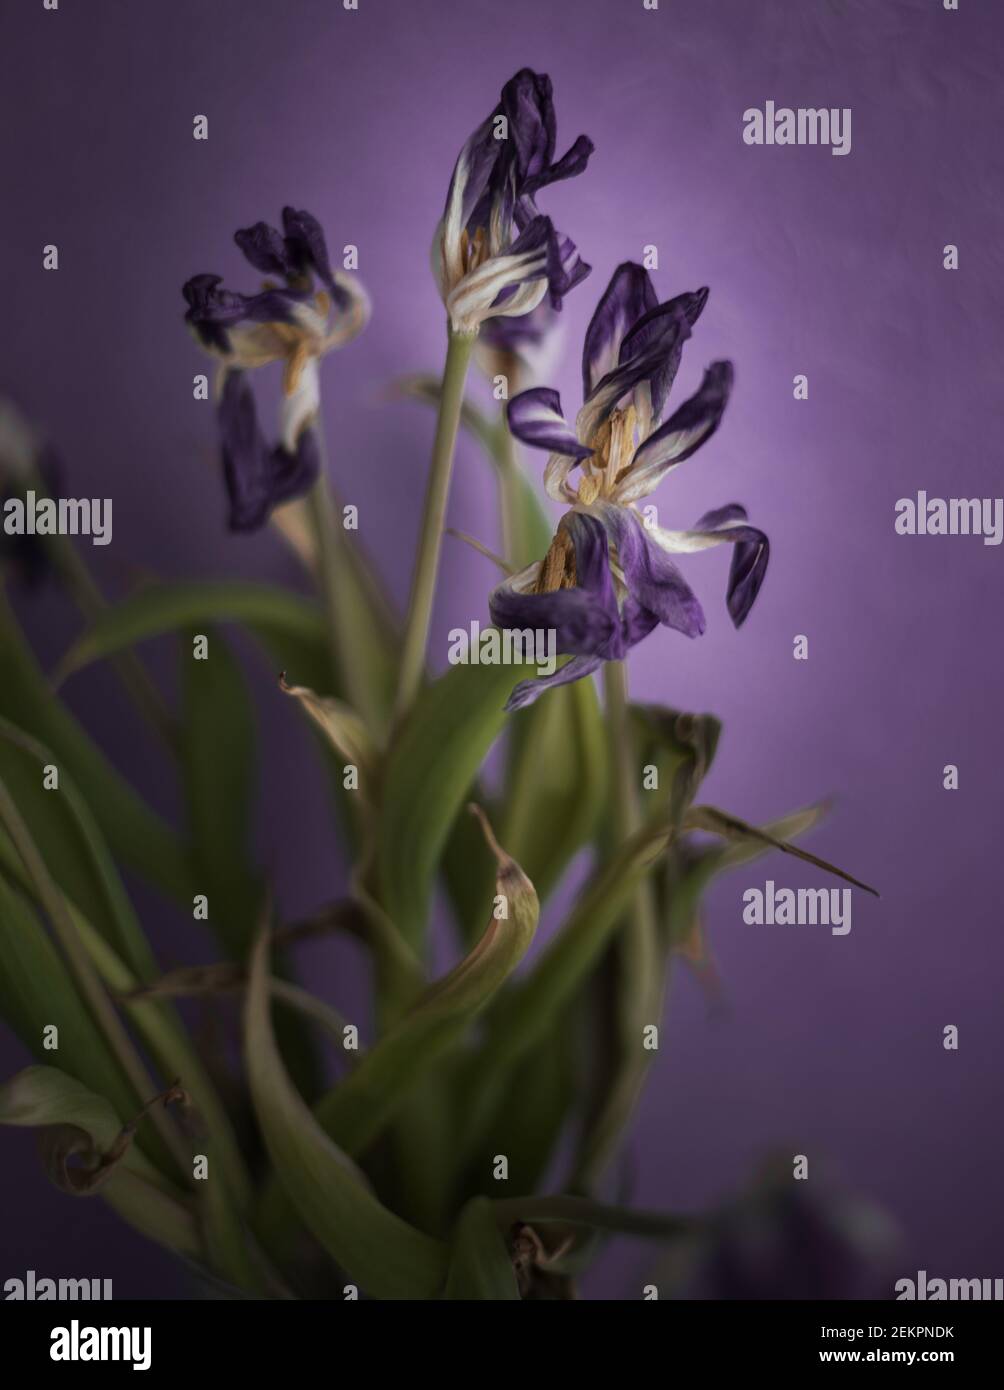 Purple faded flower against purple wall background Stock Photo